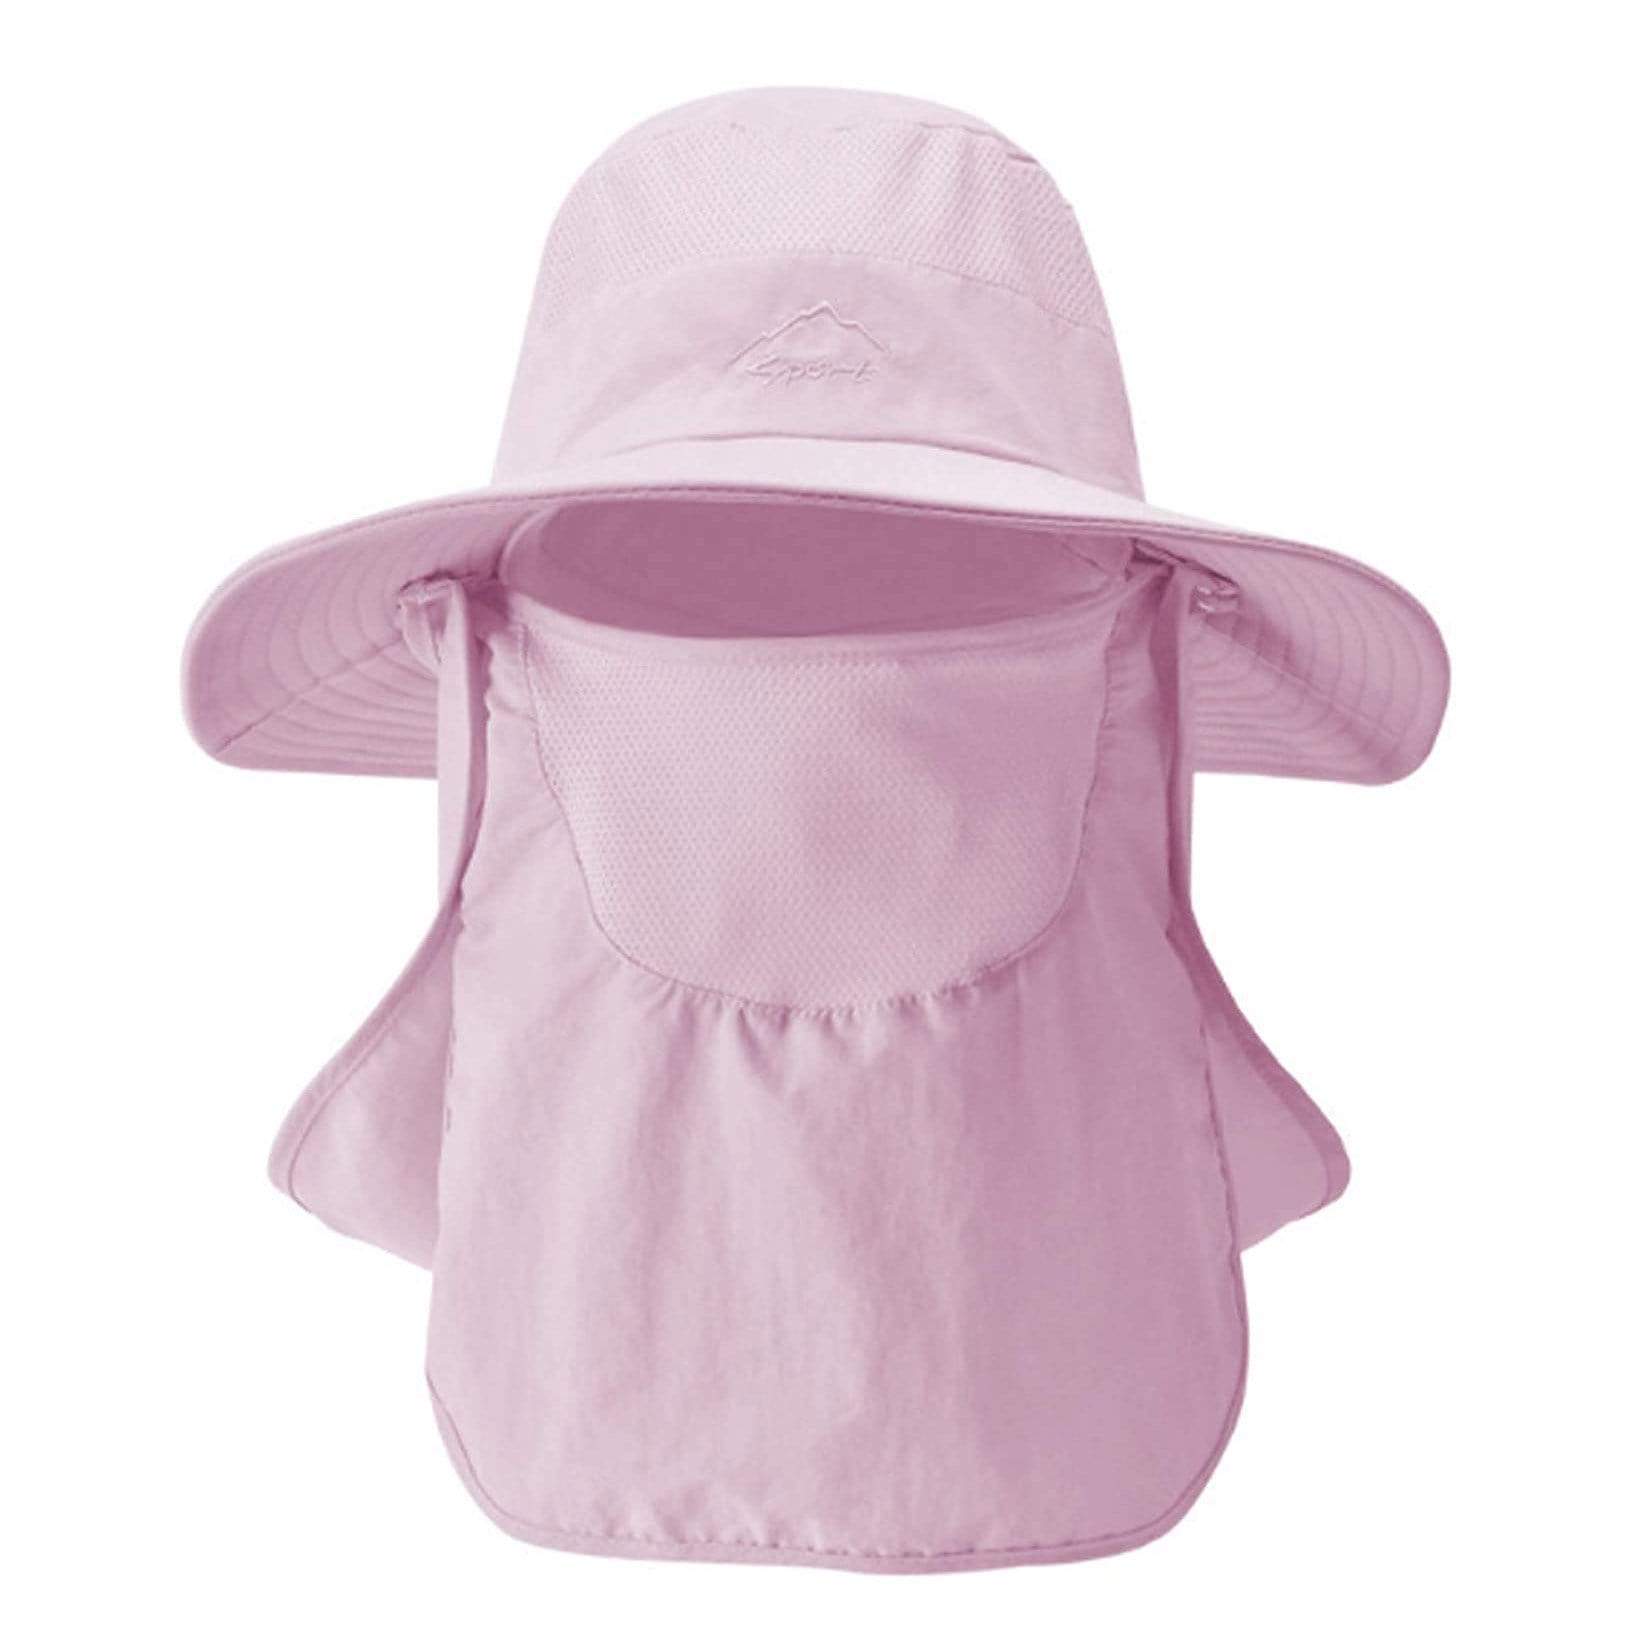 MIERSPORT Fishing Hat Sun Cap with Removable Face Neck Cover, Pink